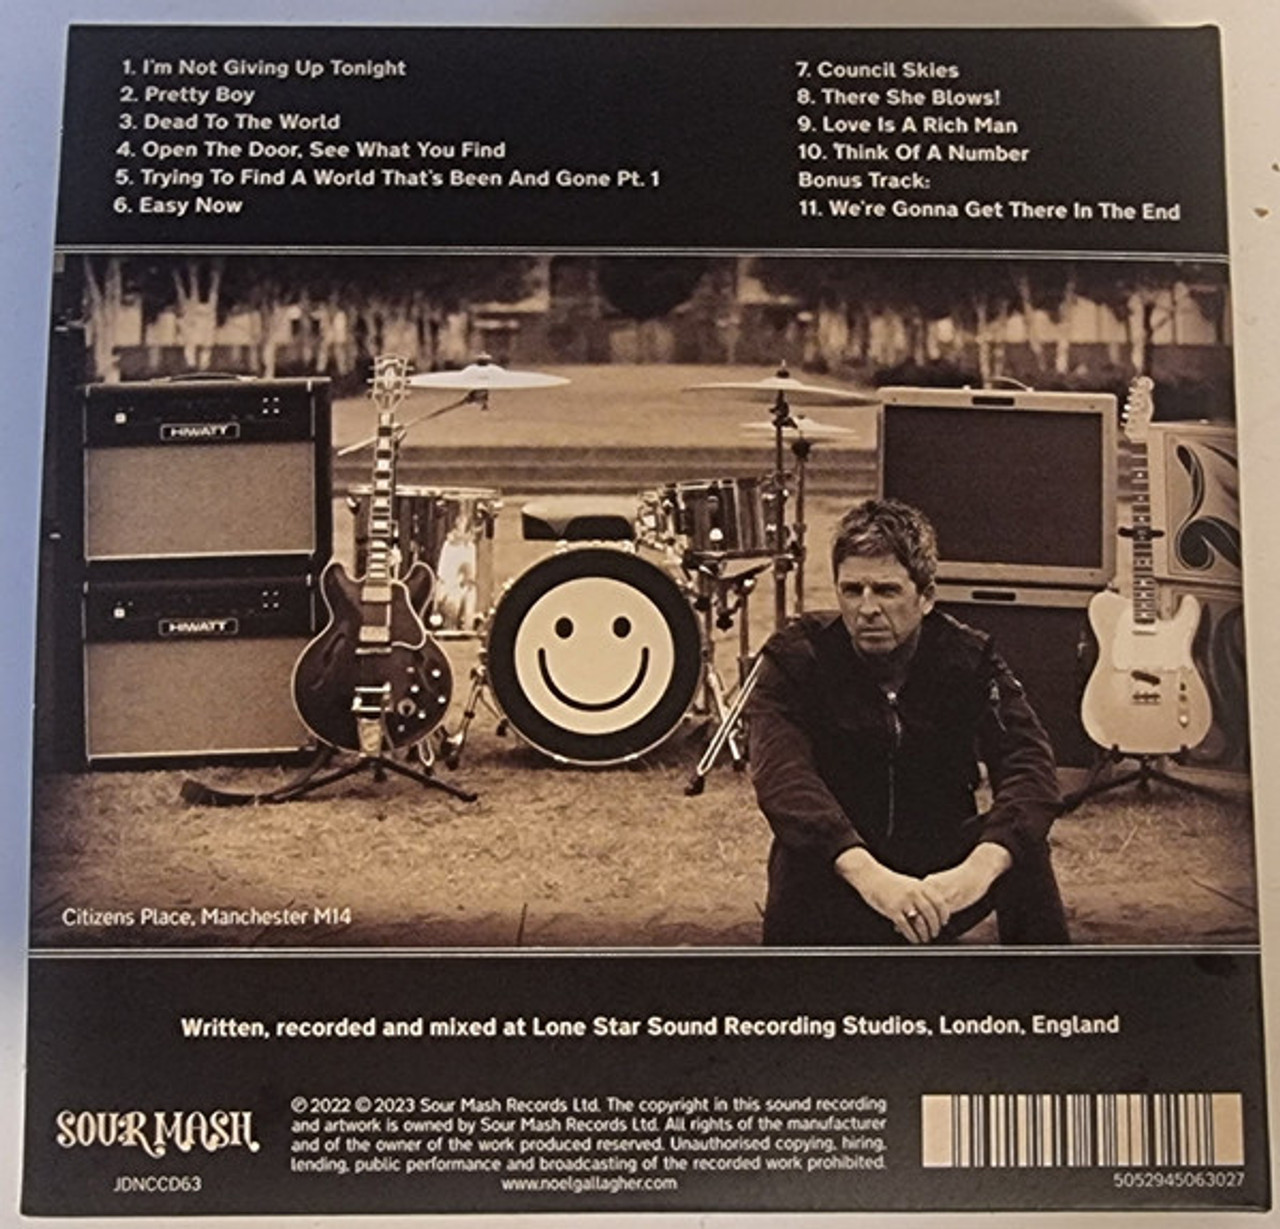 Council Skies - Noel Gallagher's High Flying Birds (#5052945063027)